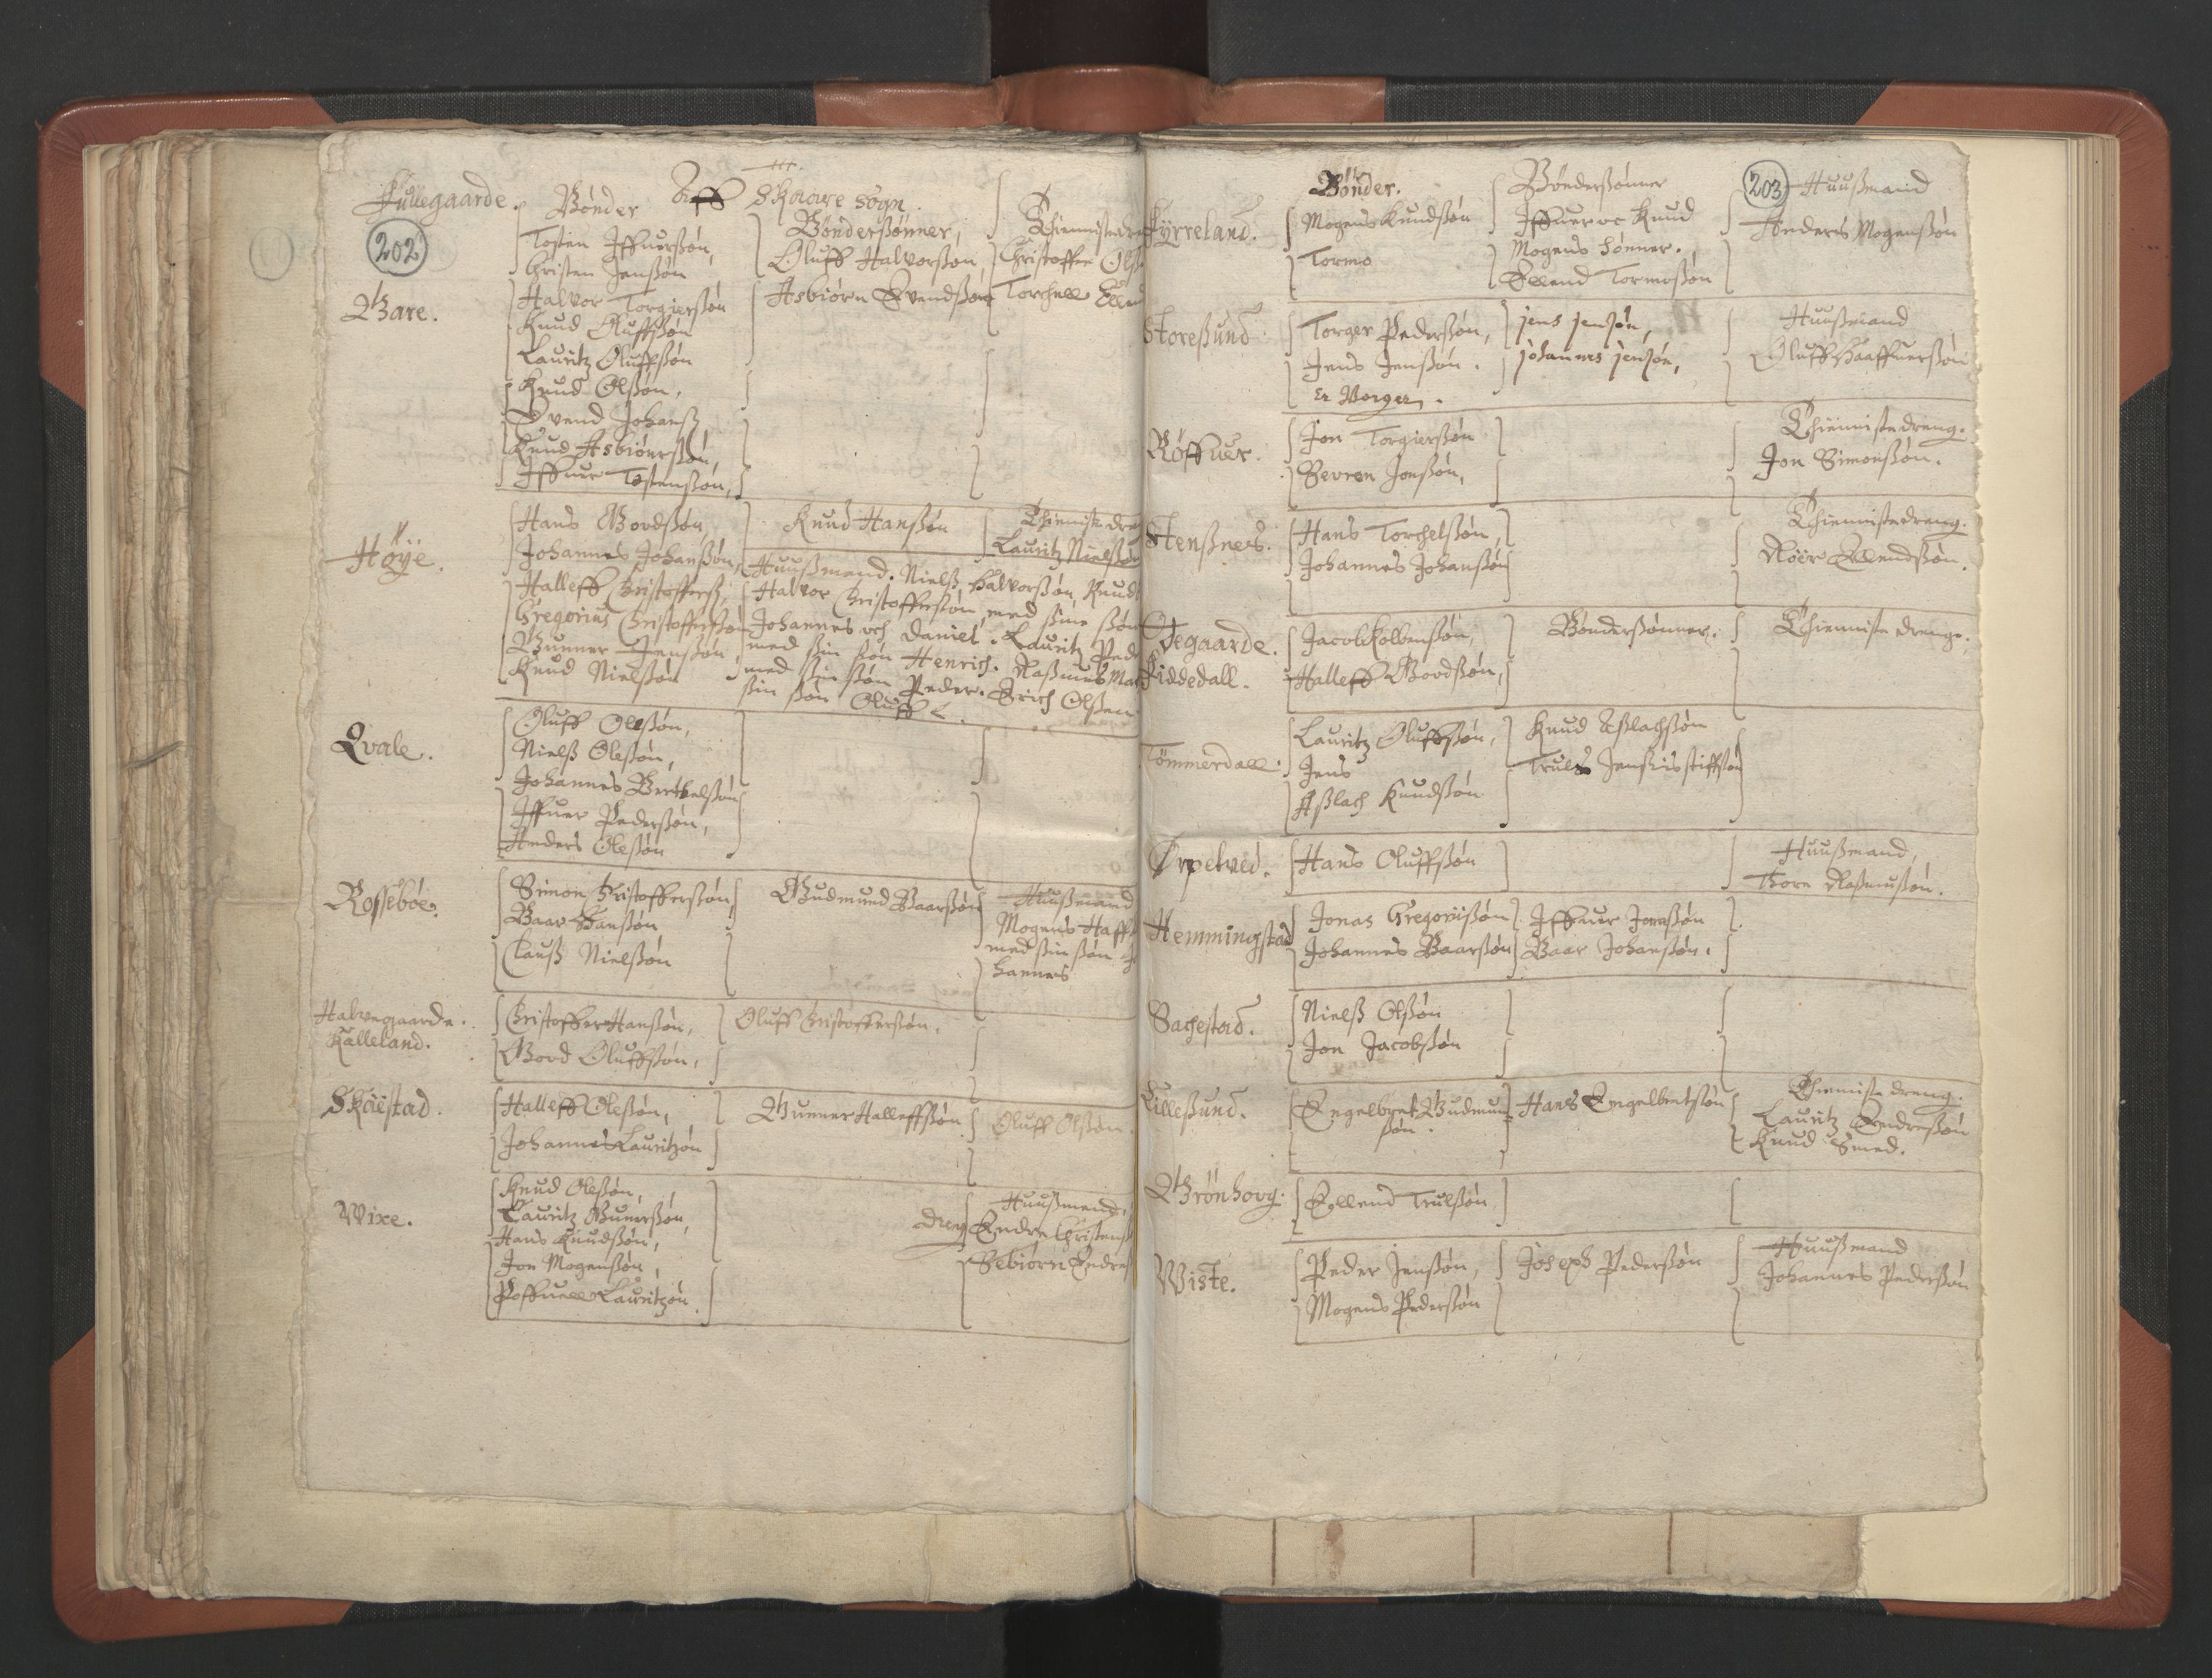 RA, Vicar's Census 1664-1666, no. 18: Stavanger deanery and Karmsund deanery, 1664-1666, p. 202-203